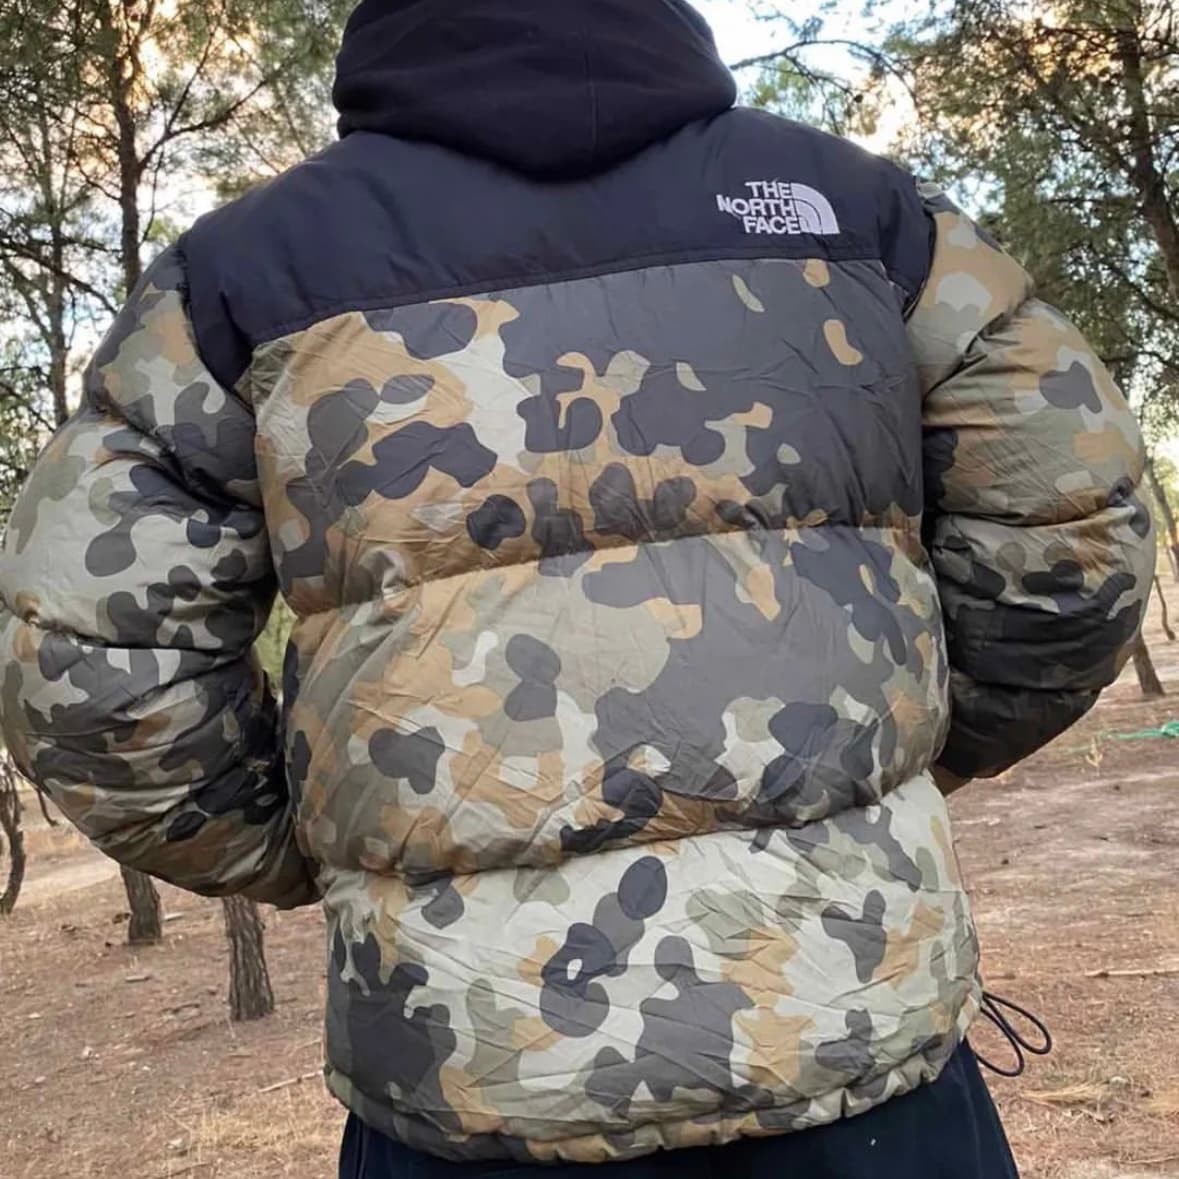 The North Face Camo Puffer Jacket